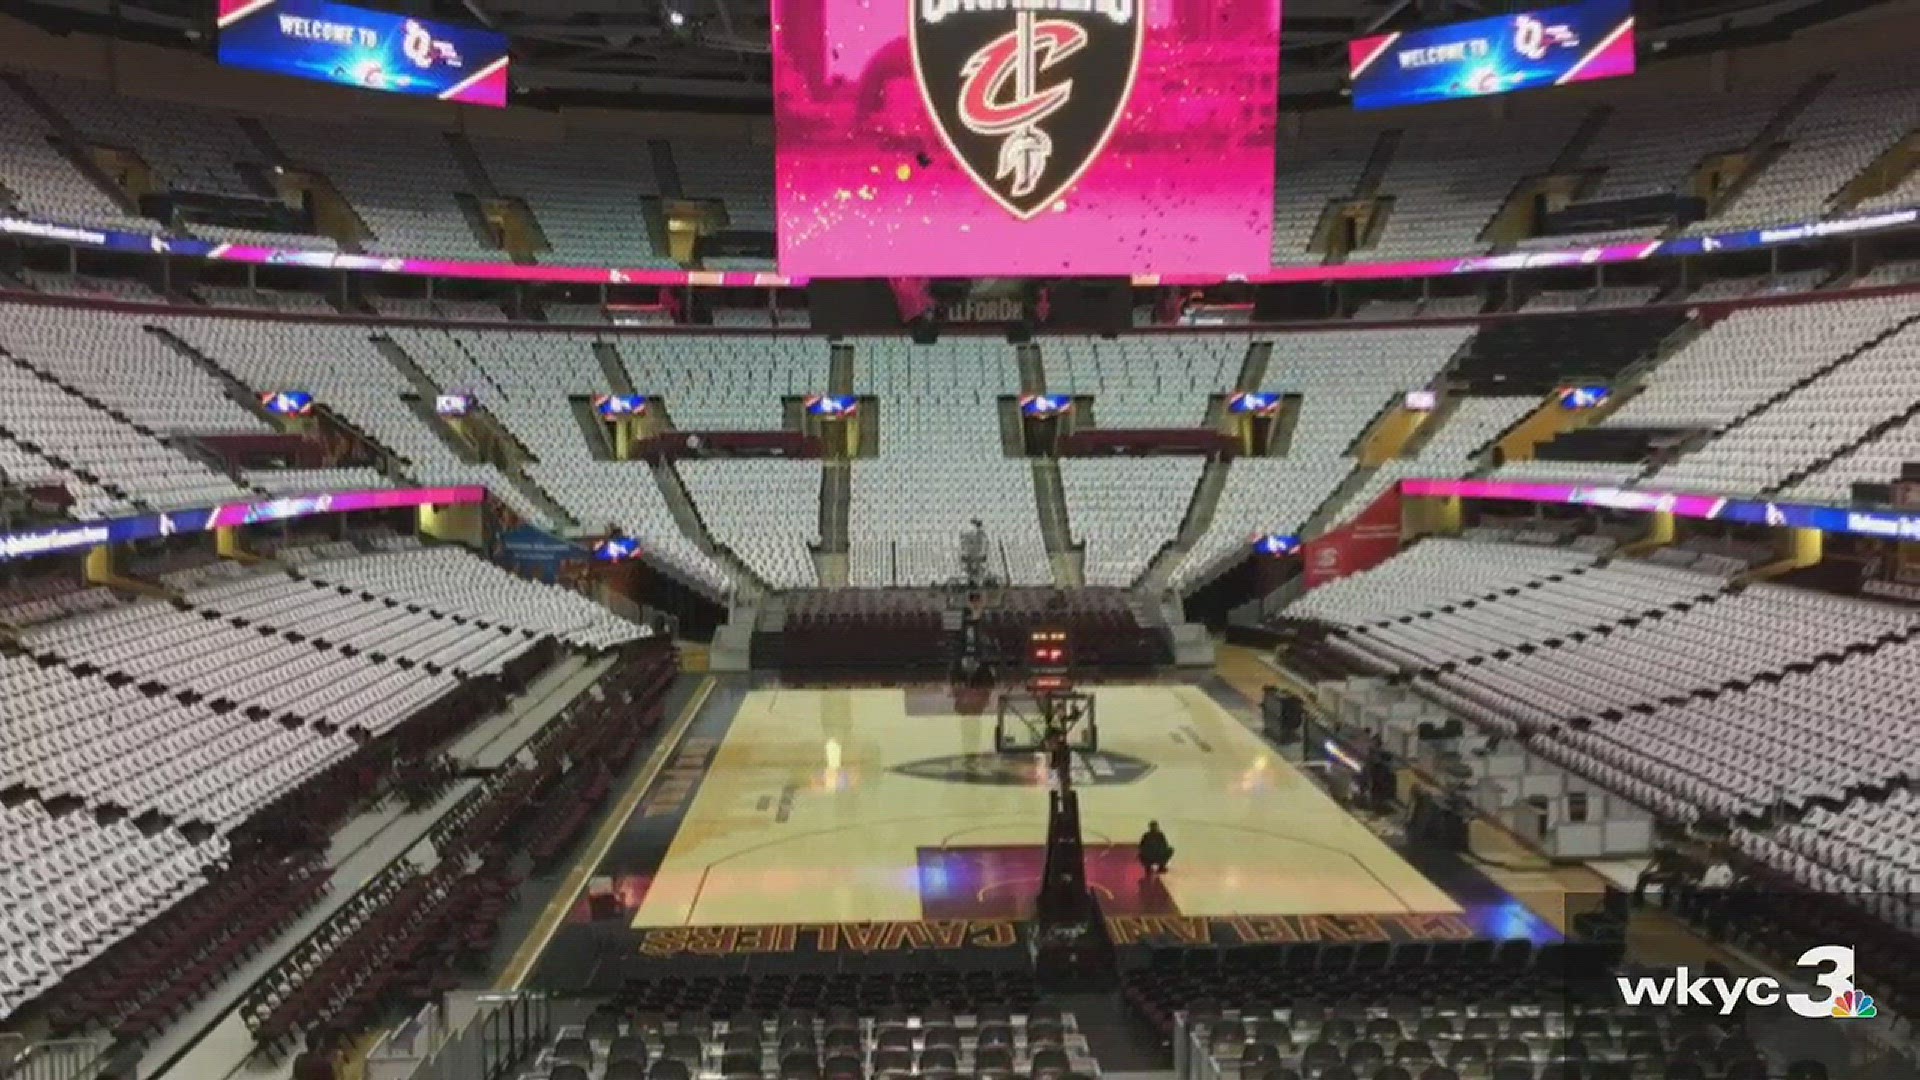 Oct. 17, 2017: Game day is here! The Cleveland Cavaliers are battling the Boston Celtics in the 2017 season opener. We got a sneak peek at preparations inside Quicken Loans Arena.